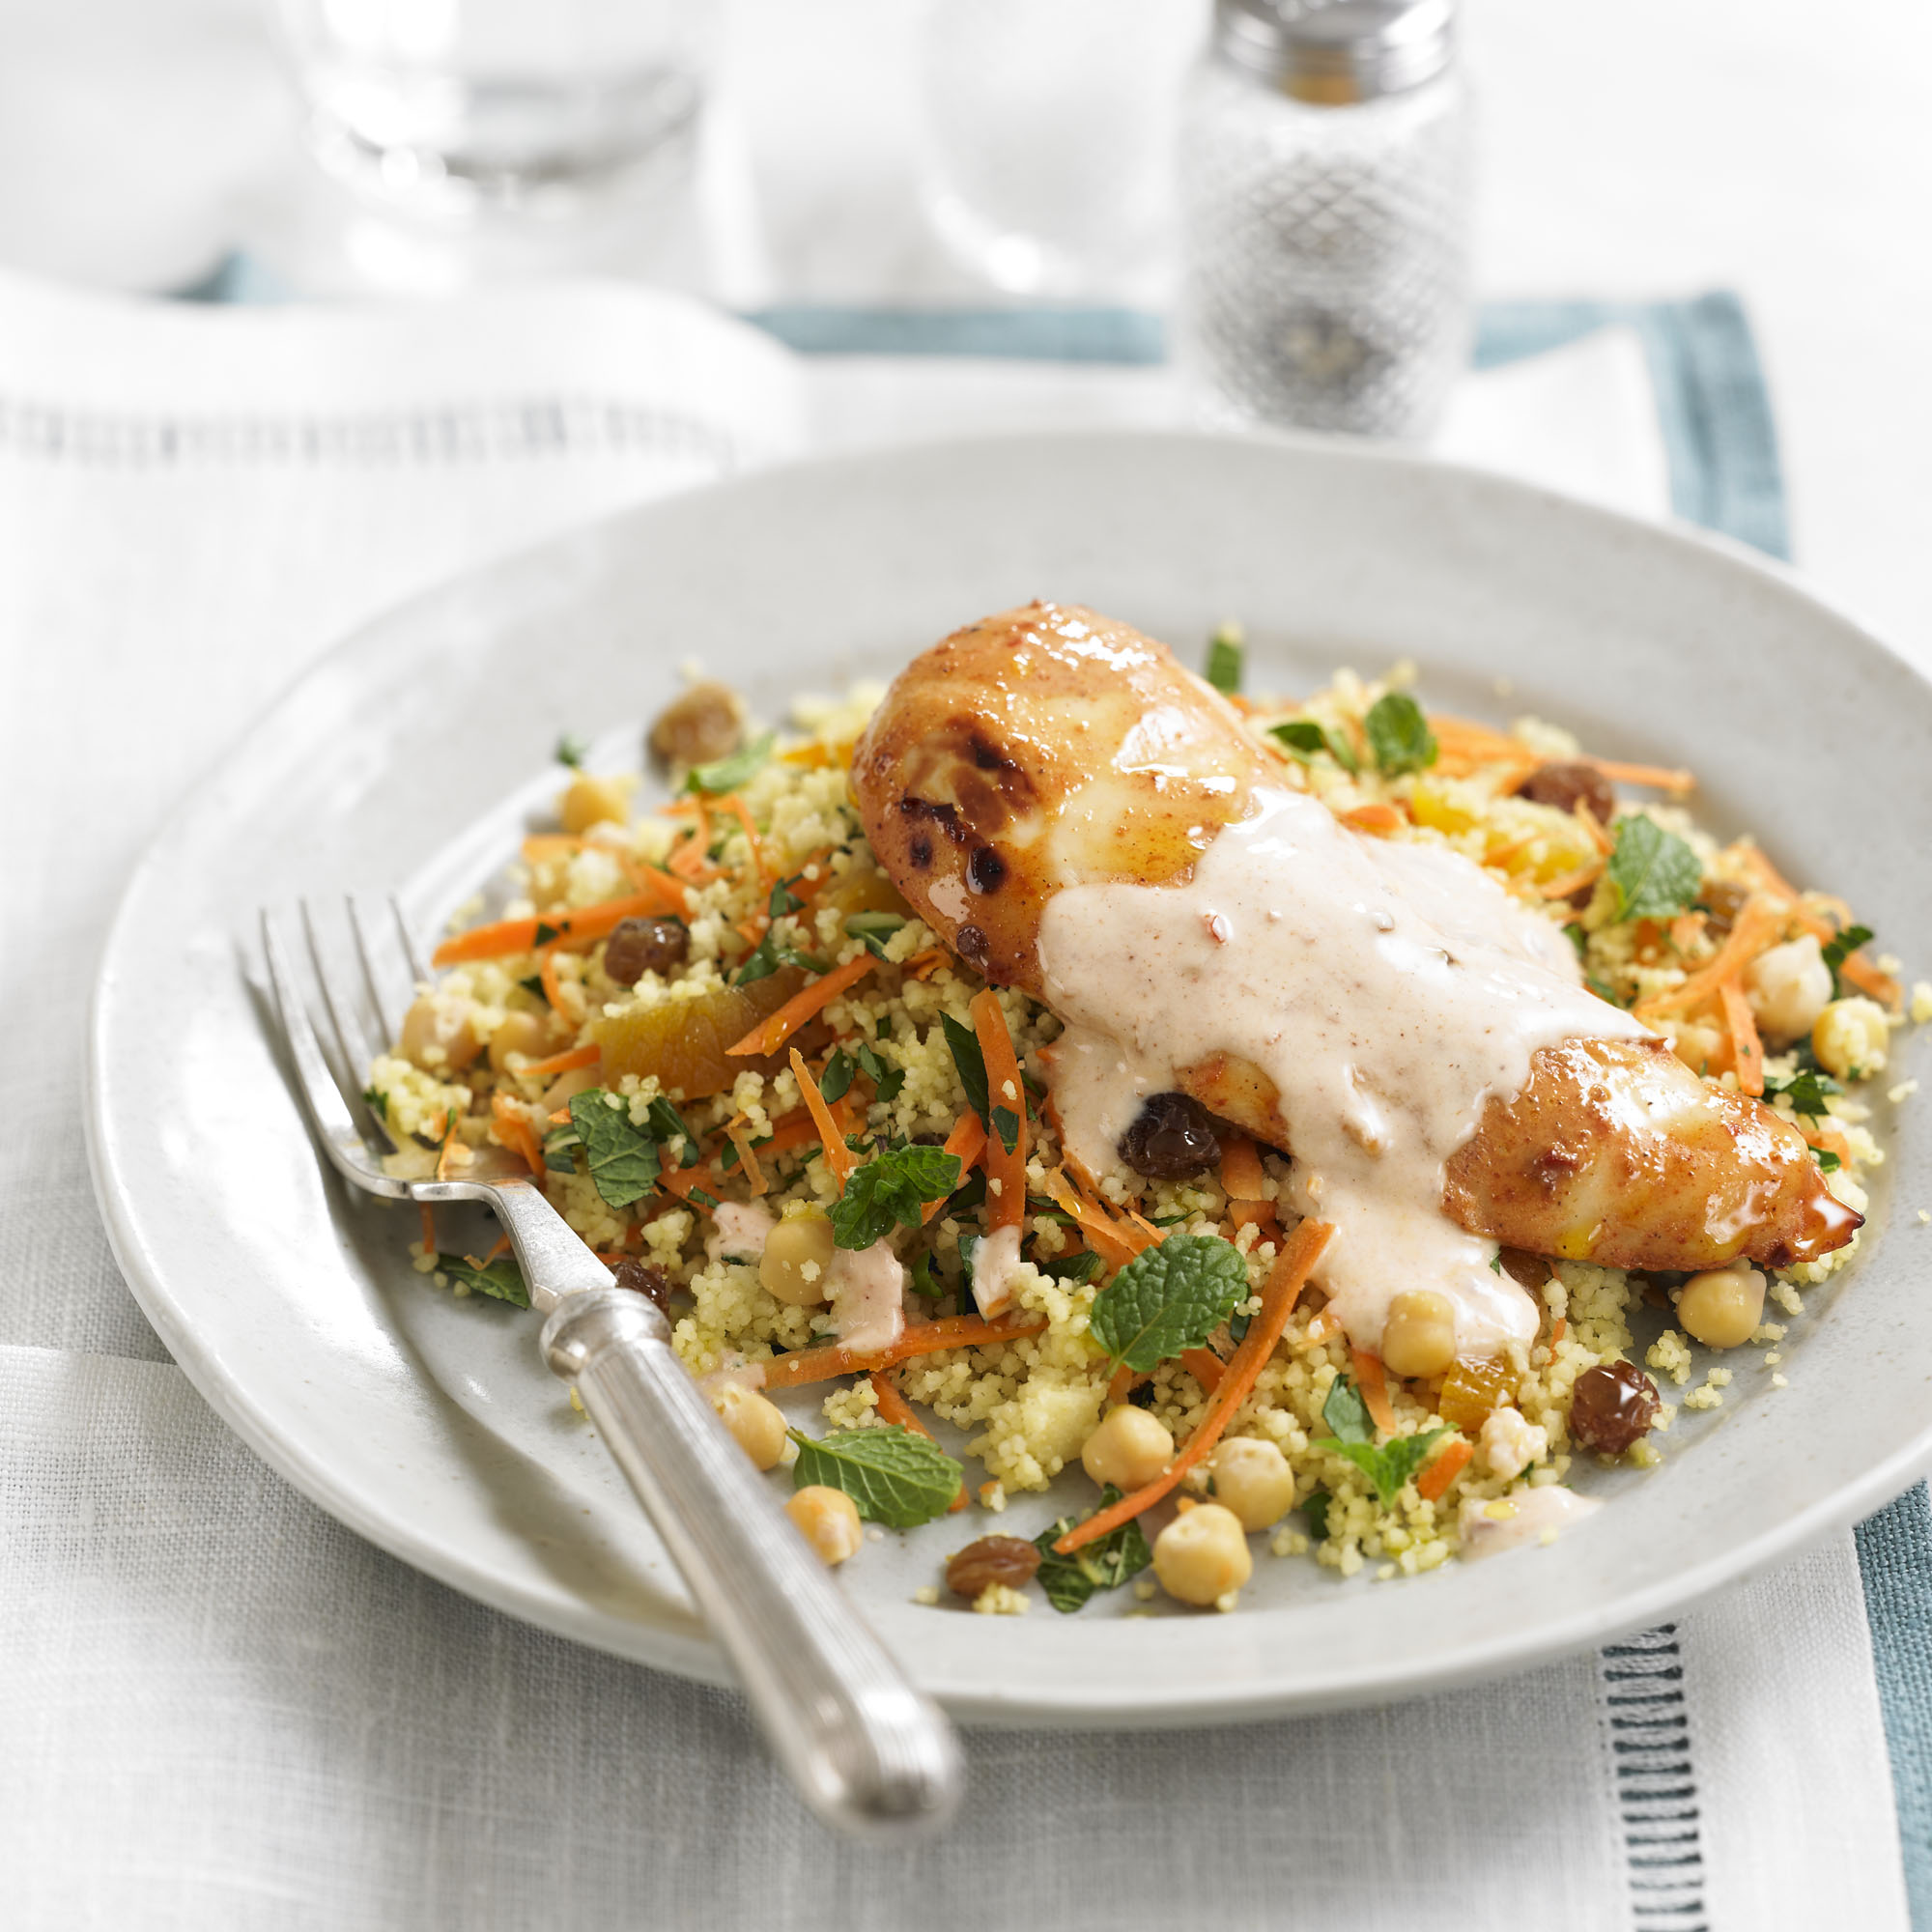 Spiced chicken with fruity couscous & yoghurt dressing recipe